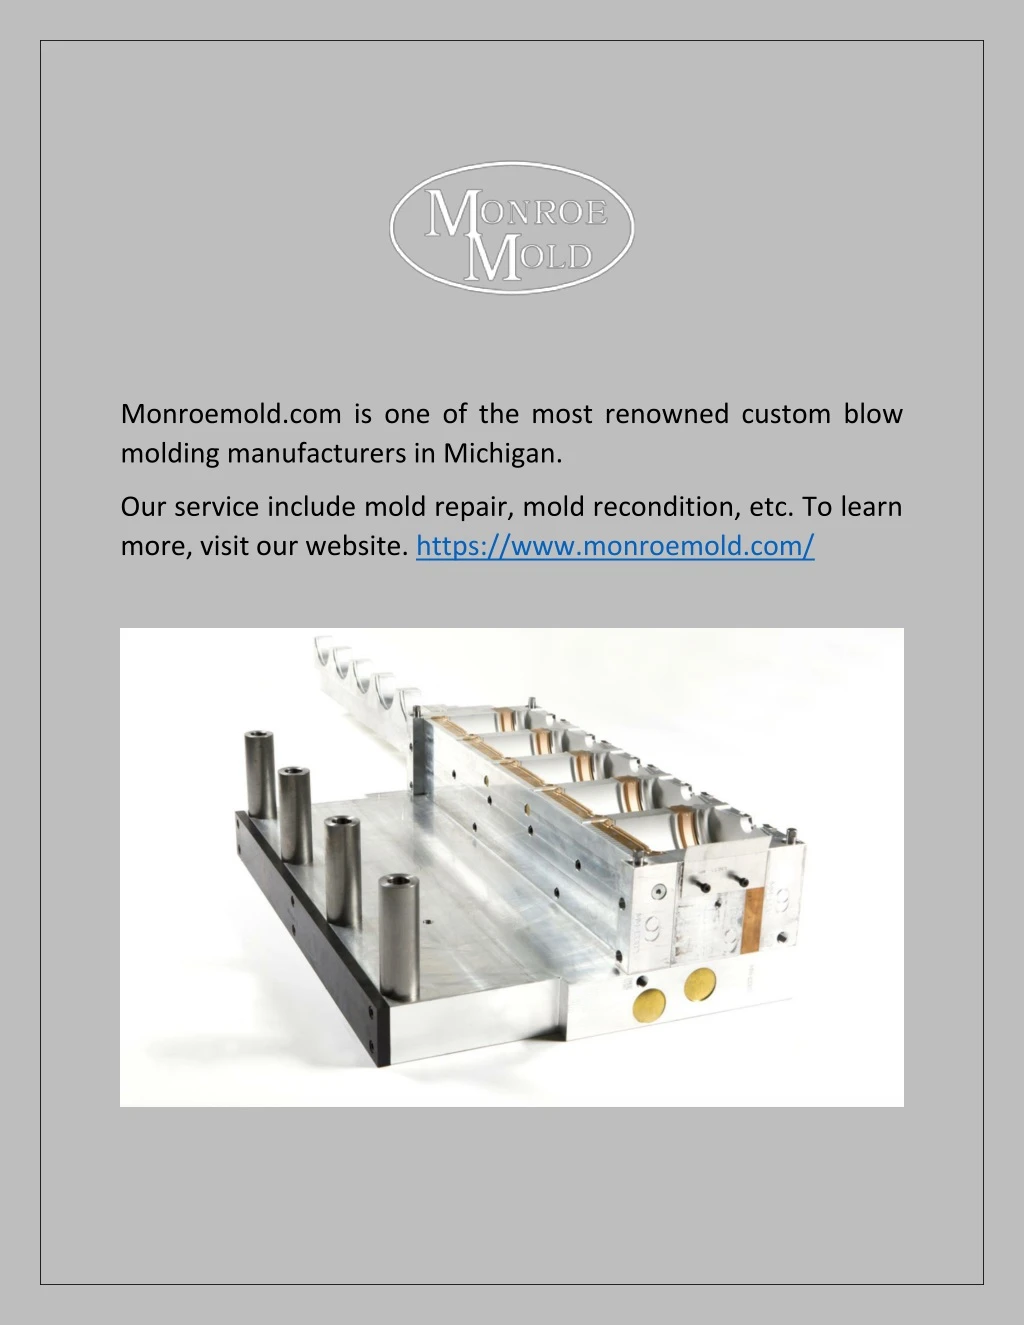 monroemold com is one of the most renowned custom